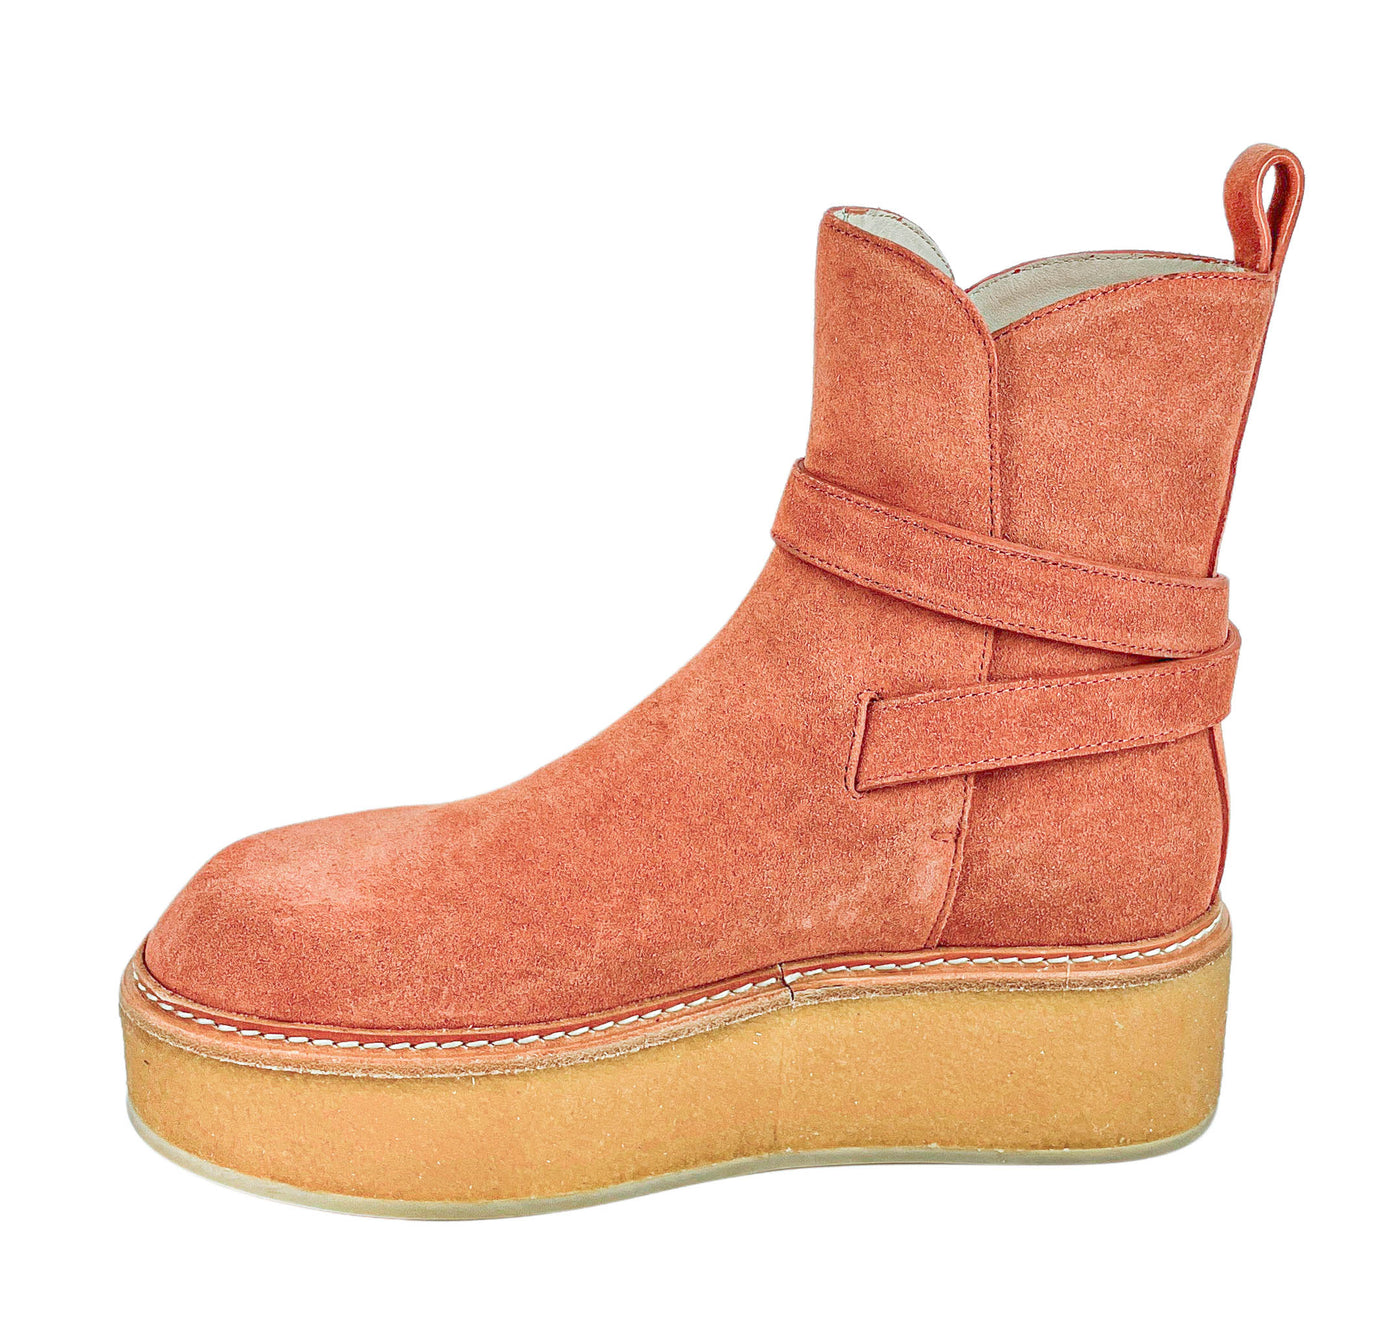 Ulla Johnson Lennox Ankle Buckle Boots in Terracota Suede - Discounts on Ulla Johnson at UAL